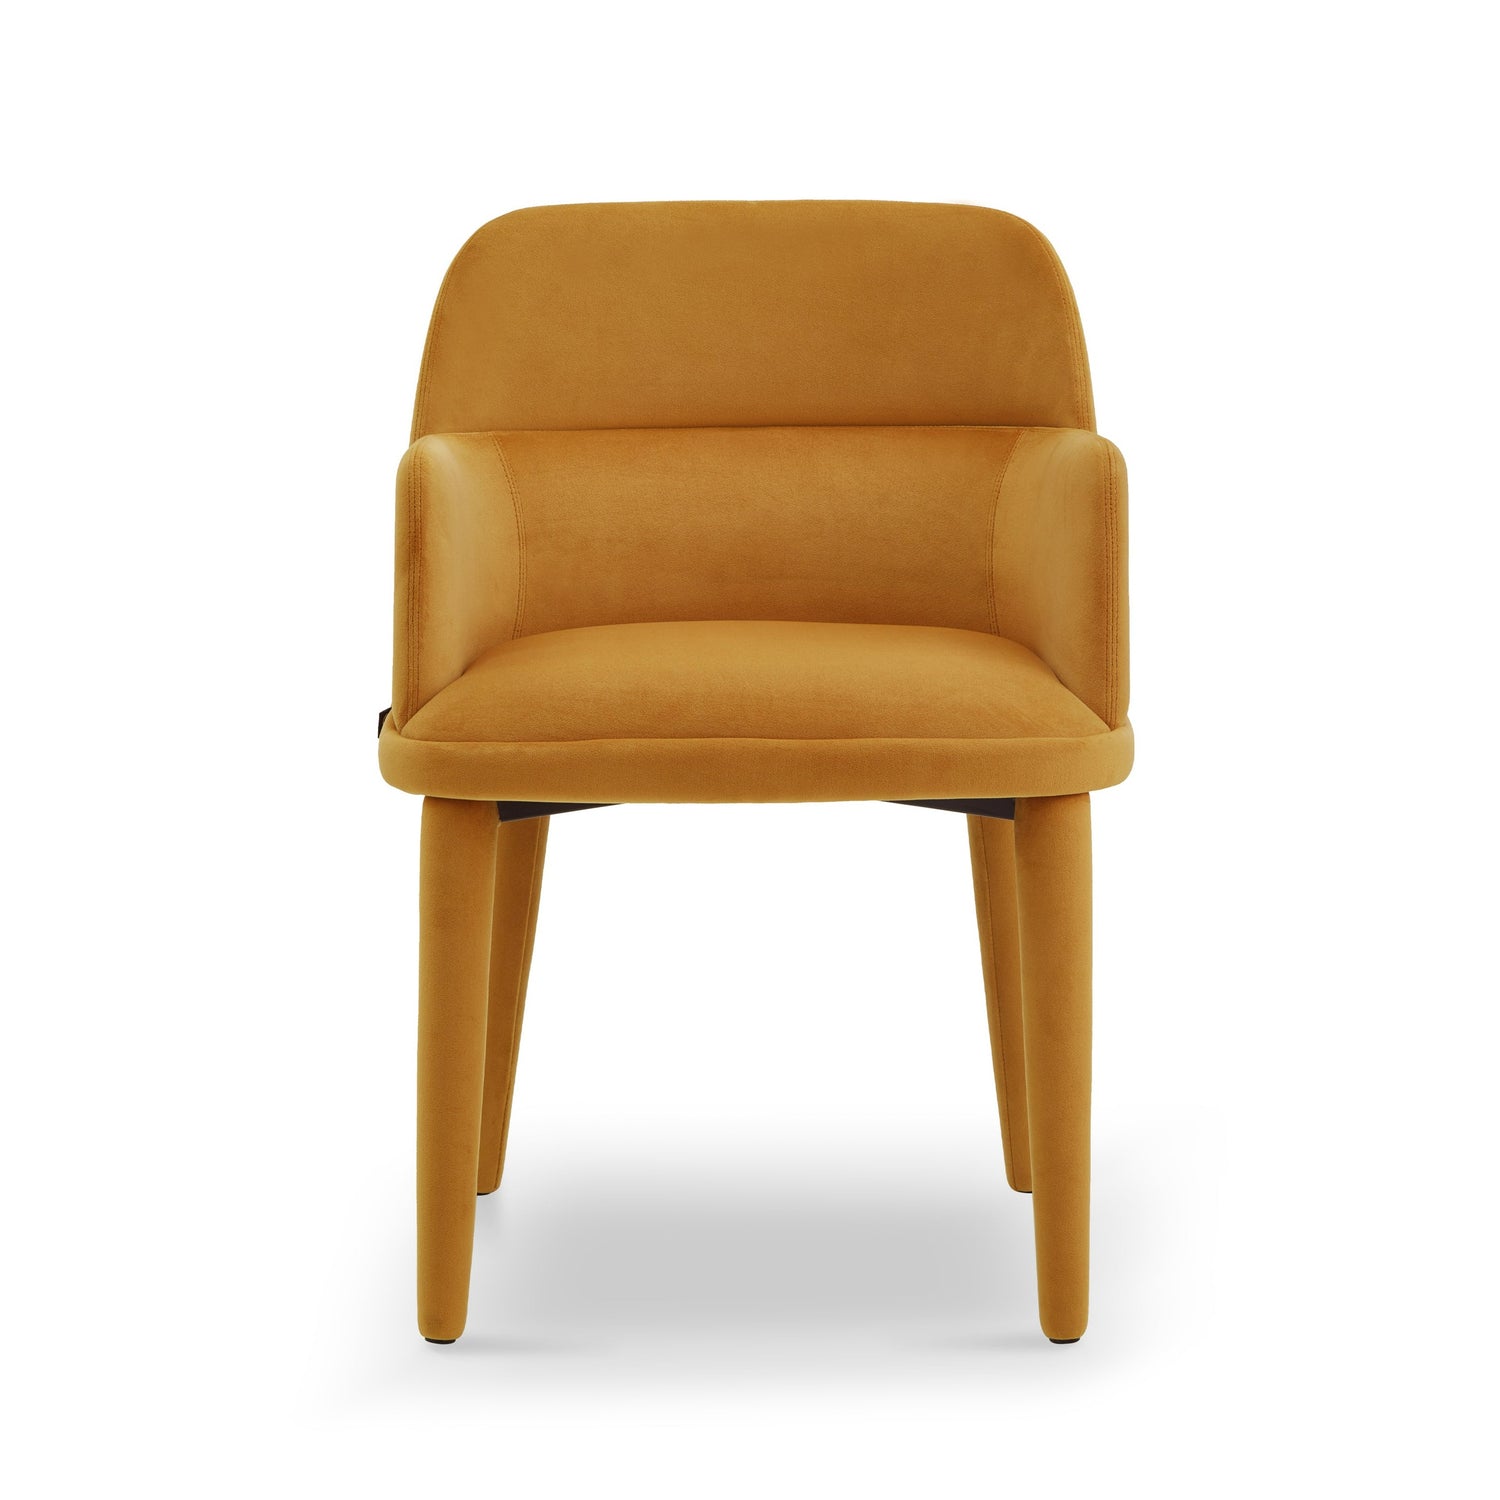  LiangAndEimil-Liang & Eimil Diva Dining Chair with Arms in  Kaster II Mustard-Yellow 885 